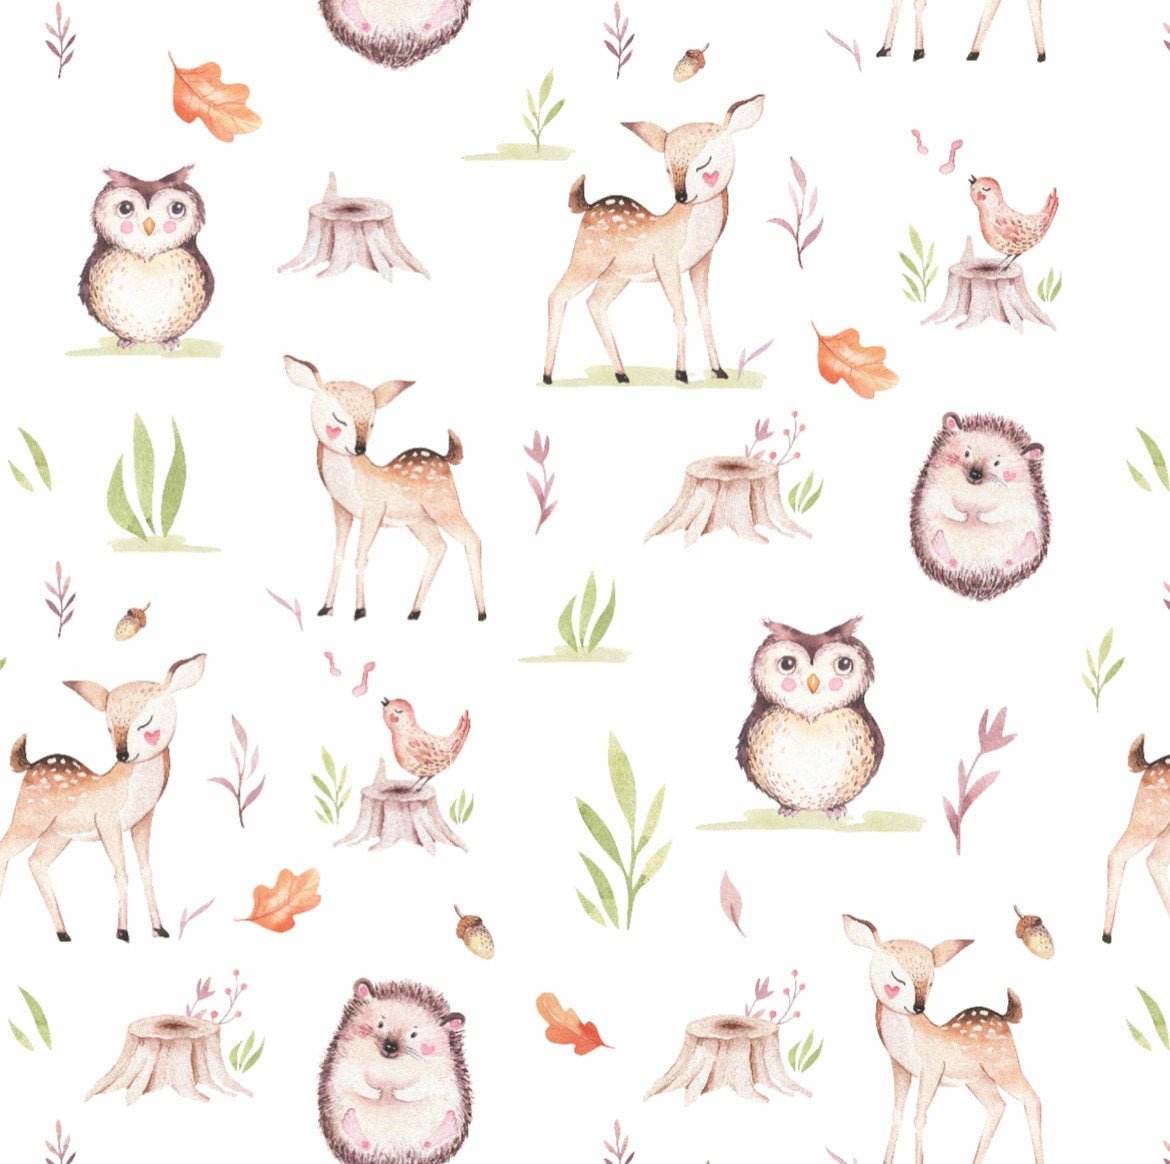 Mpanwen Woodland Wrapping Paper for Baby Shower, 8 Sheets Large Woodsy Gift  Wrap Forest Wrapping Paper for Baby Boys Girls - 27 x 39.5 Inches Per